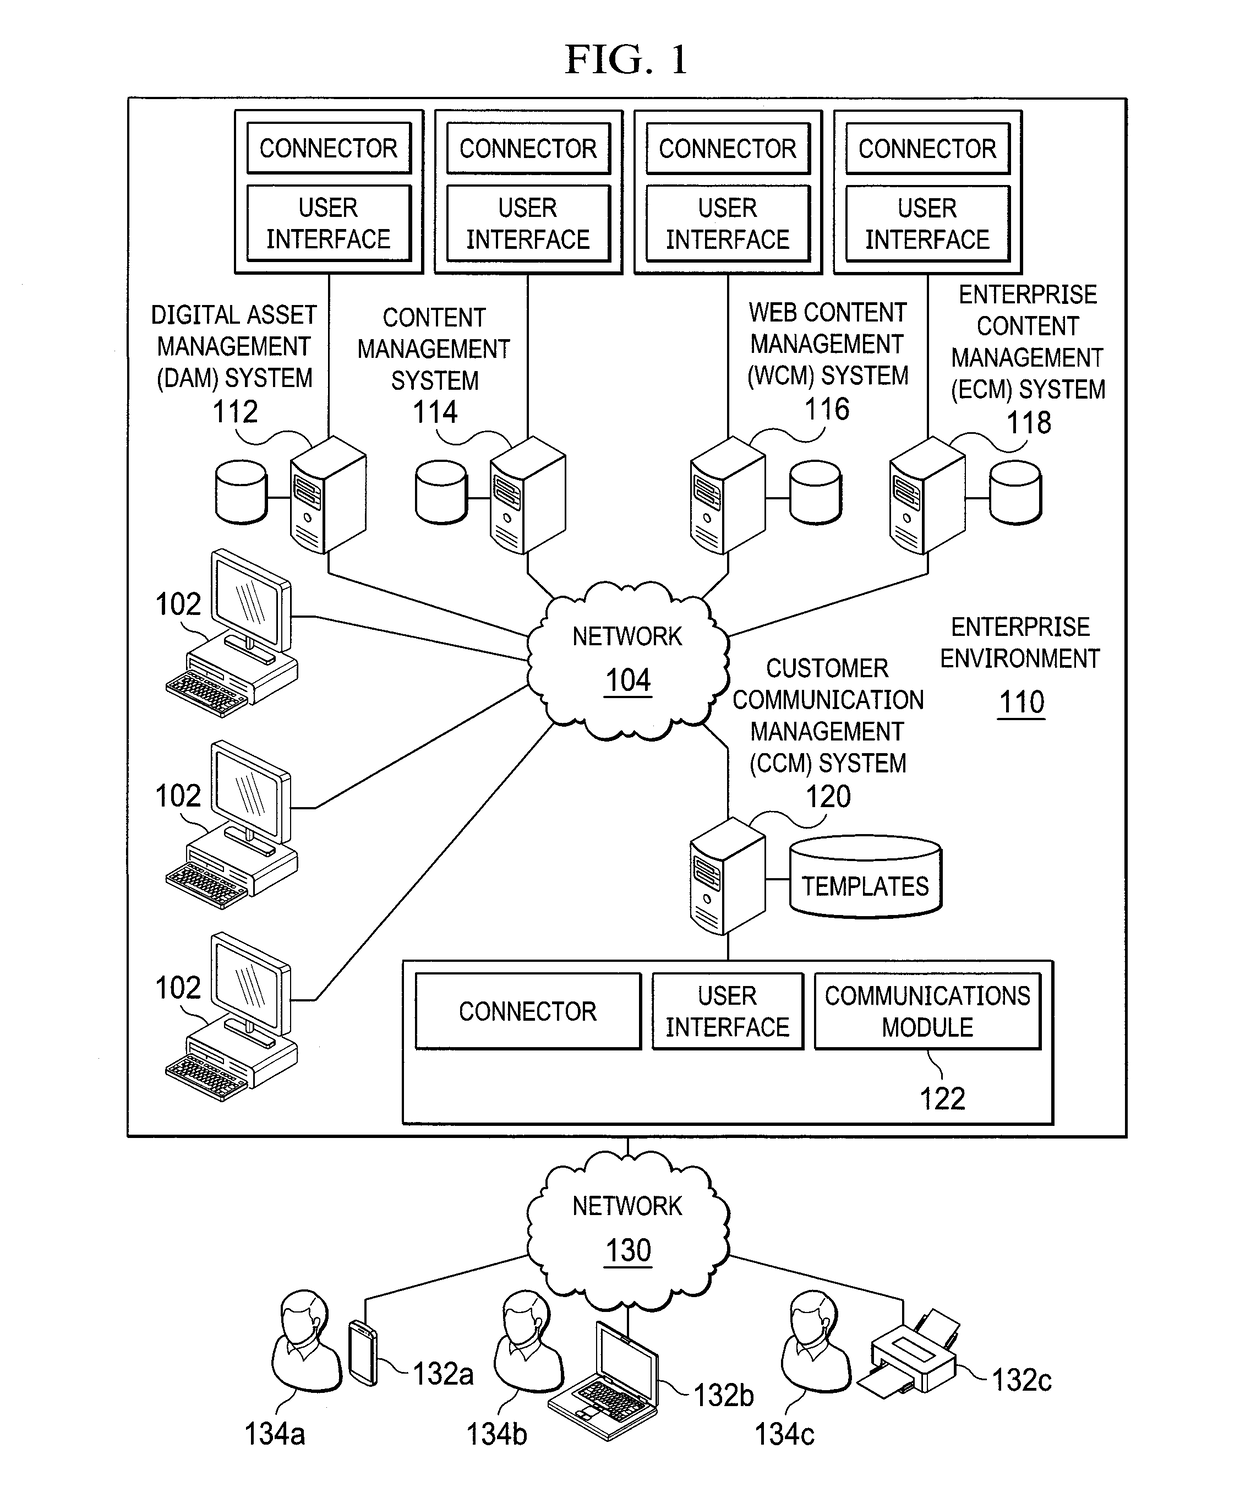 Systems and methods for tracking assets across a distributed network environment